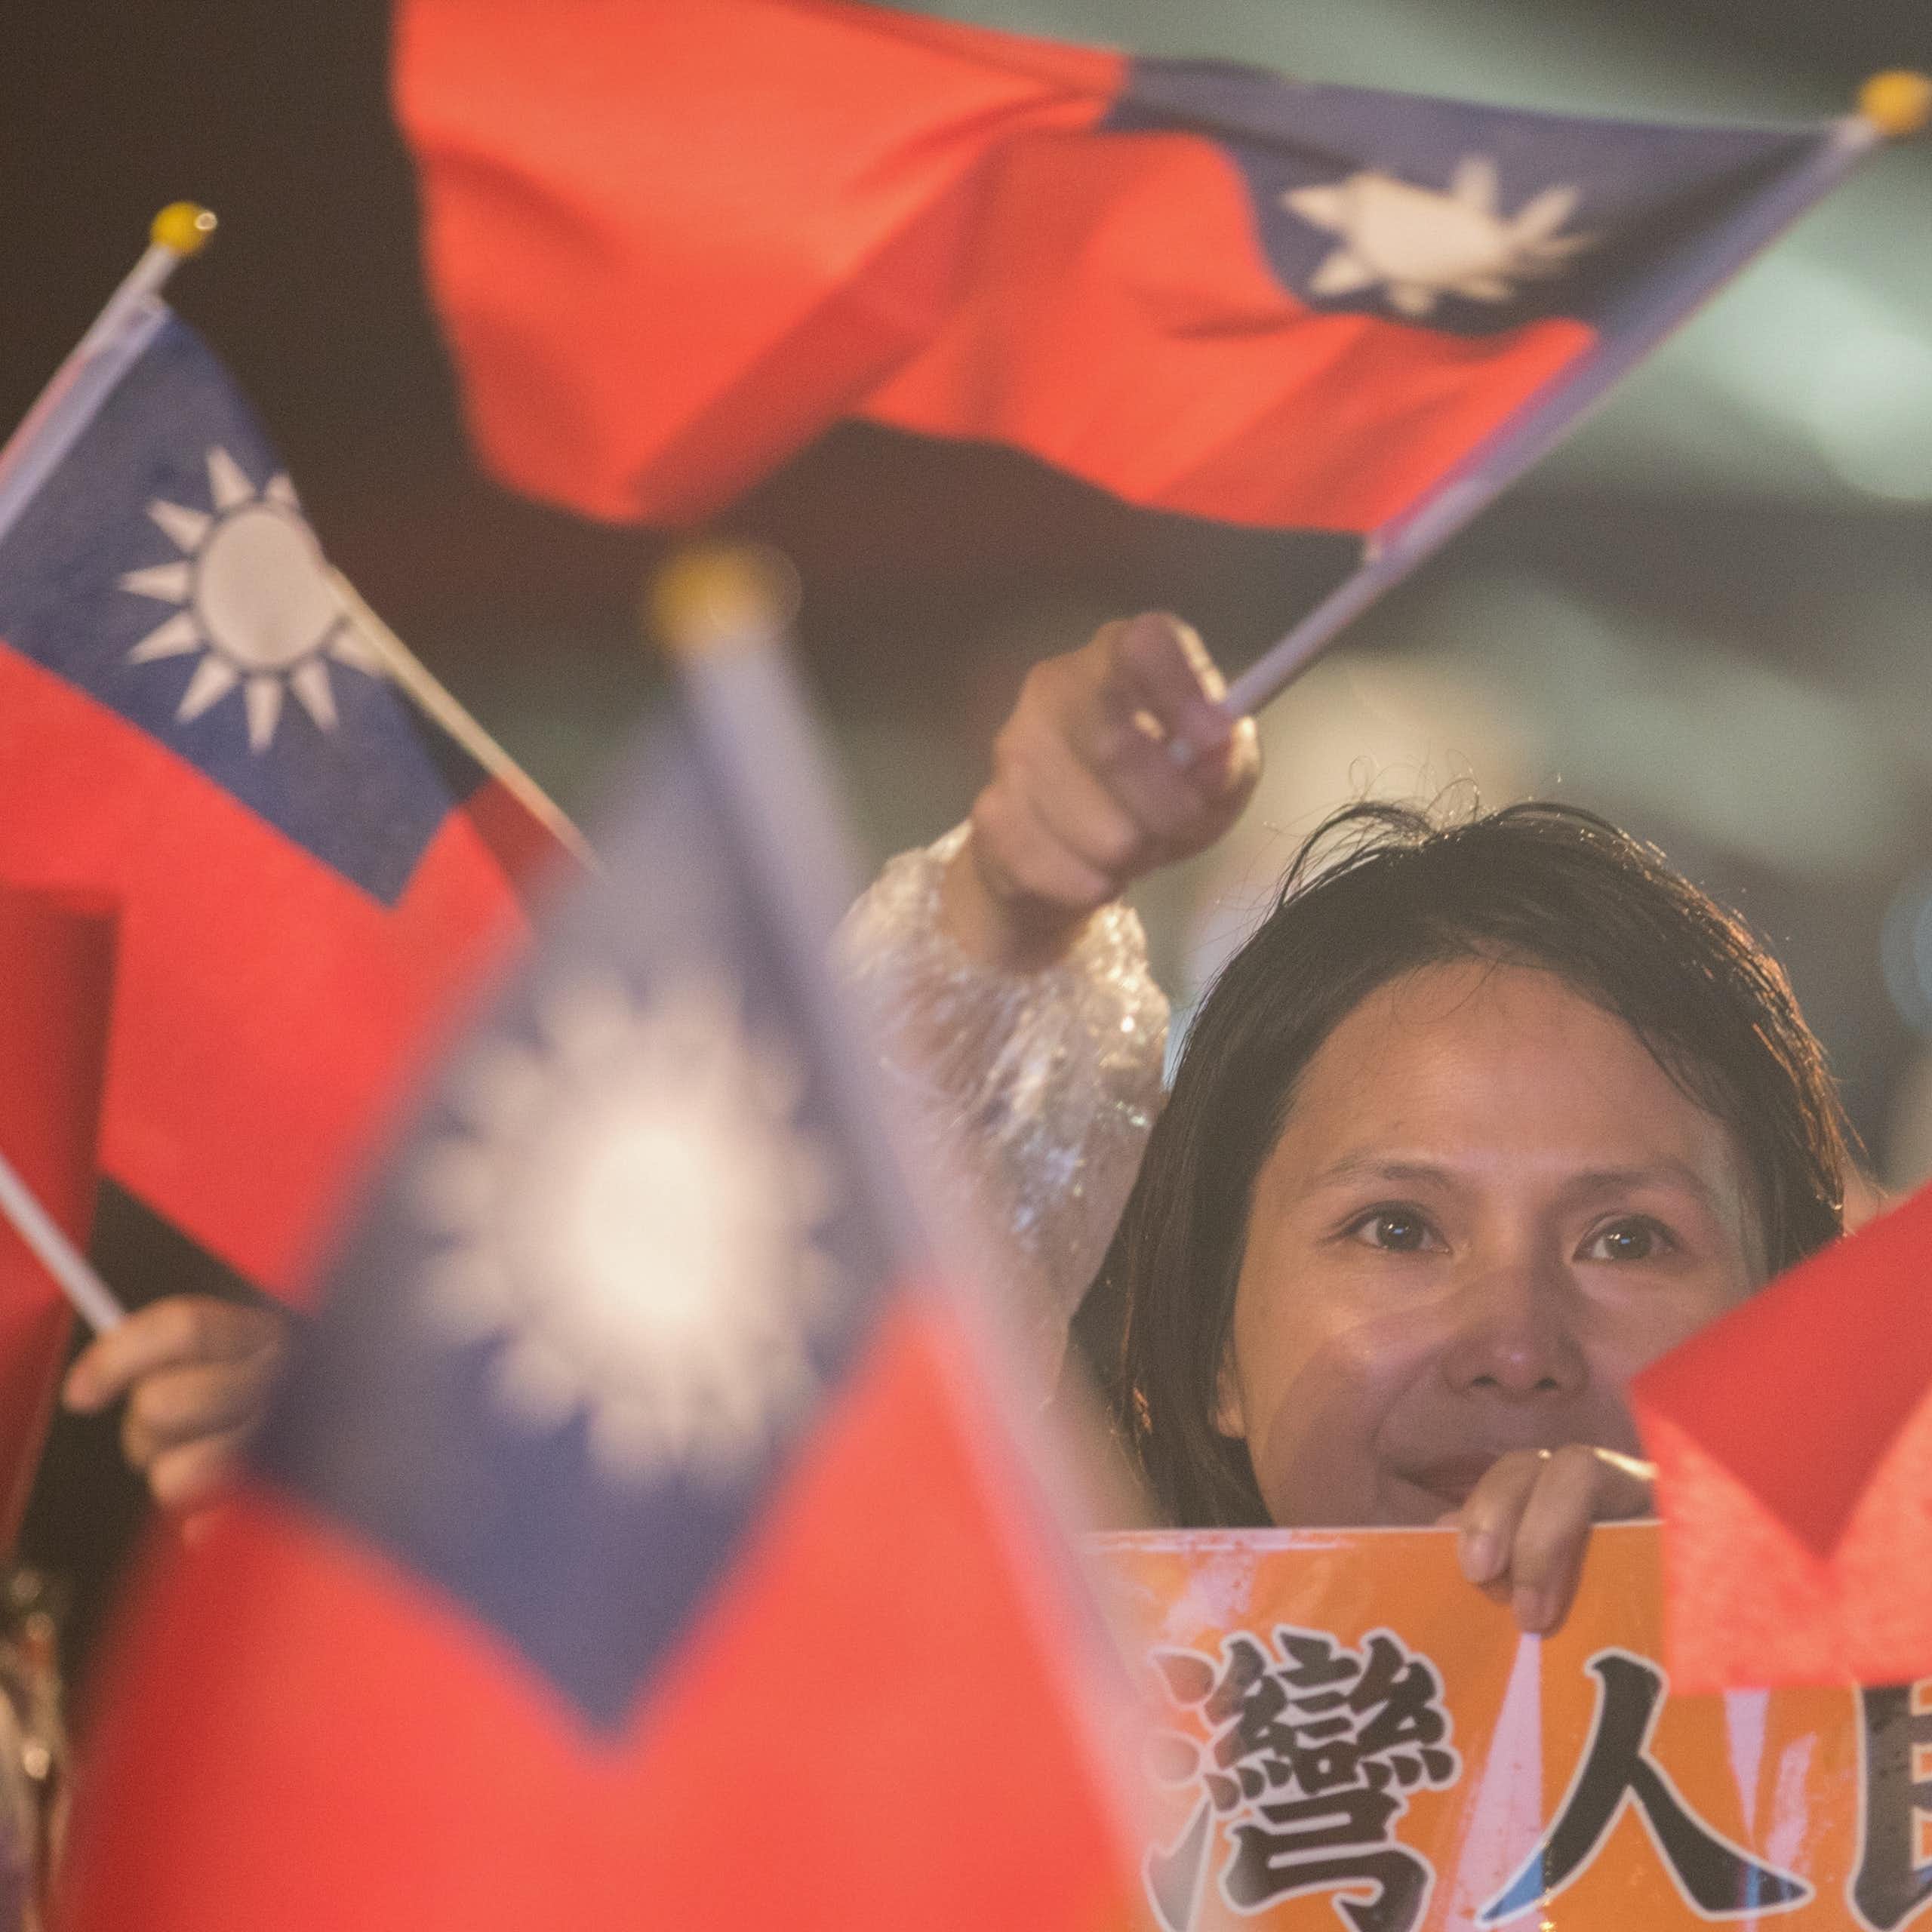 A woman at a campaign rally surrounded by flags of Taiwan.